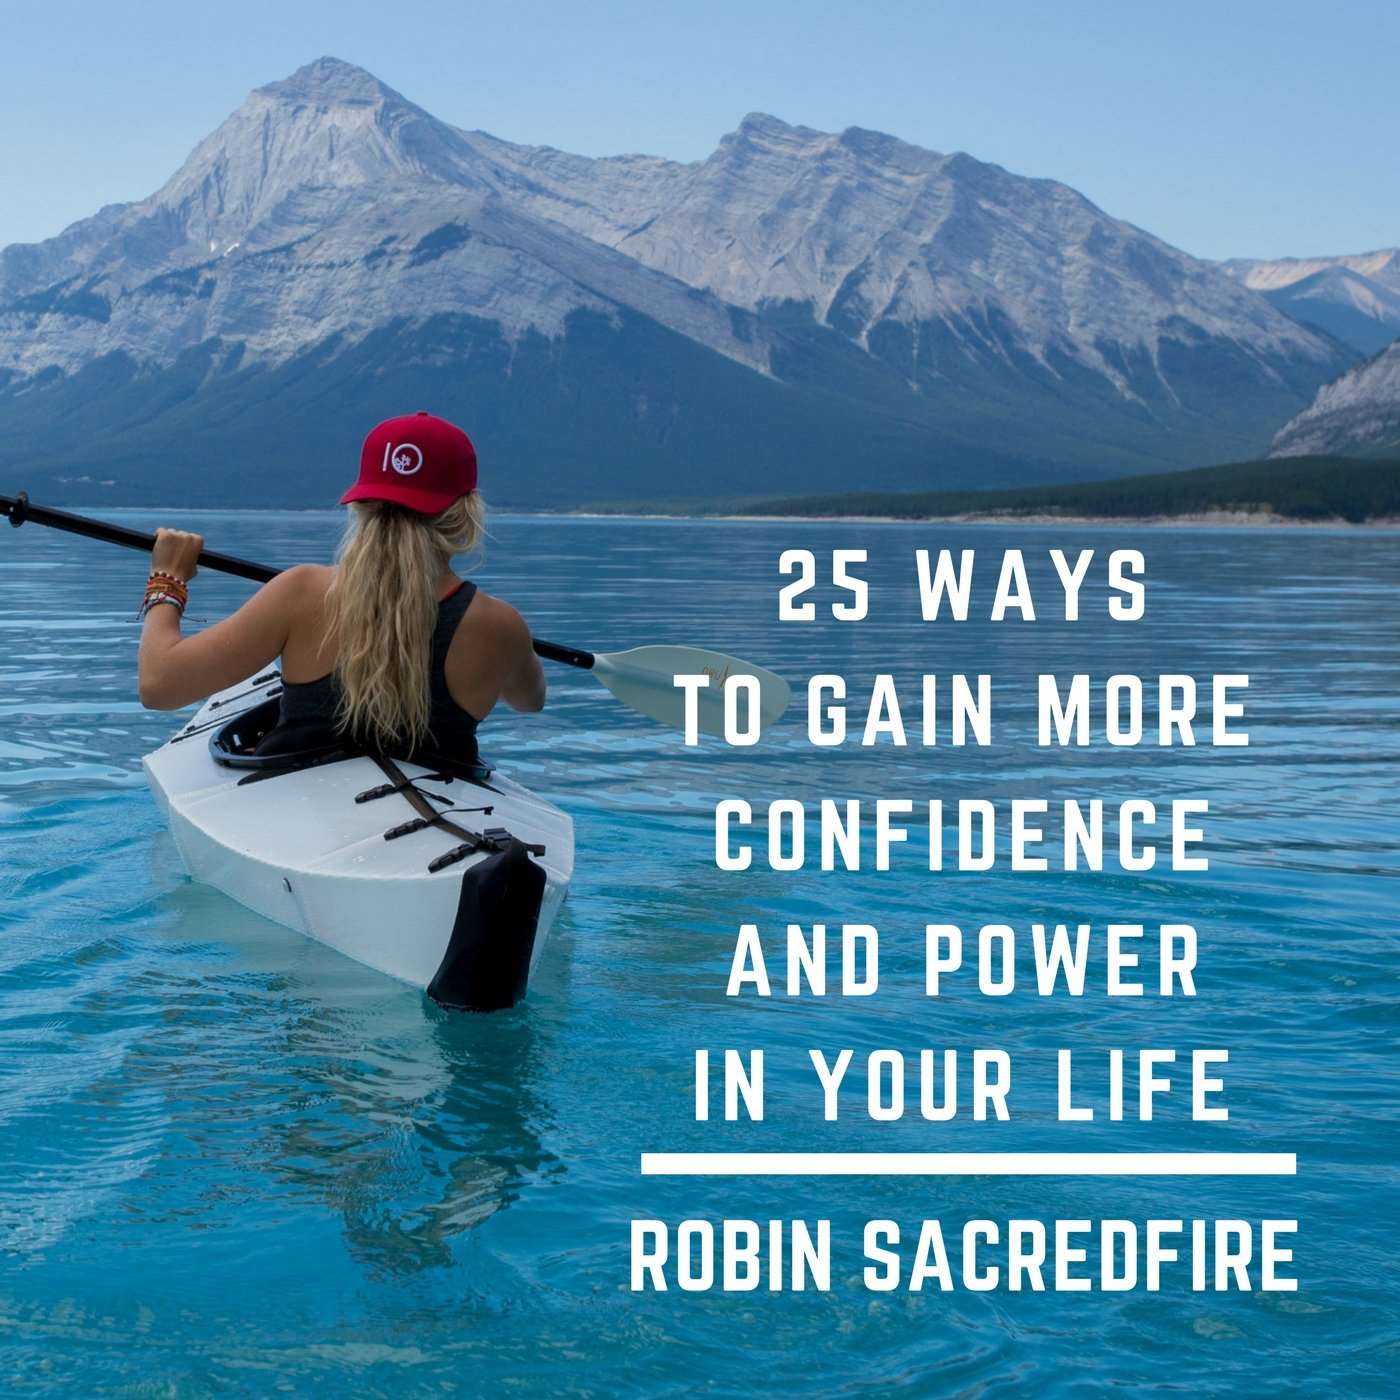 25 Ways to Gain More Confidence and Power in Your Life - 22 Lions